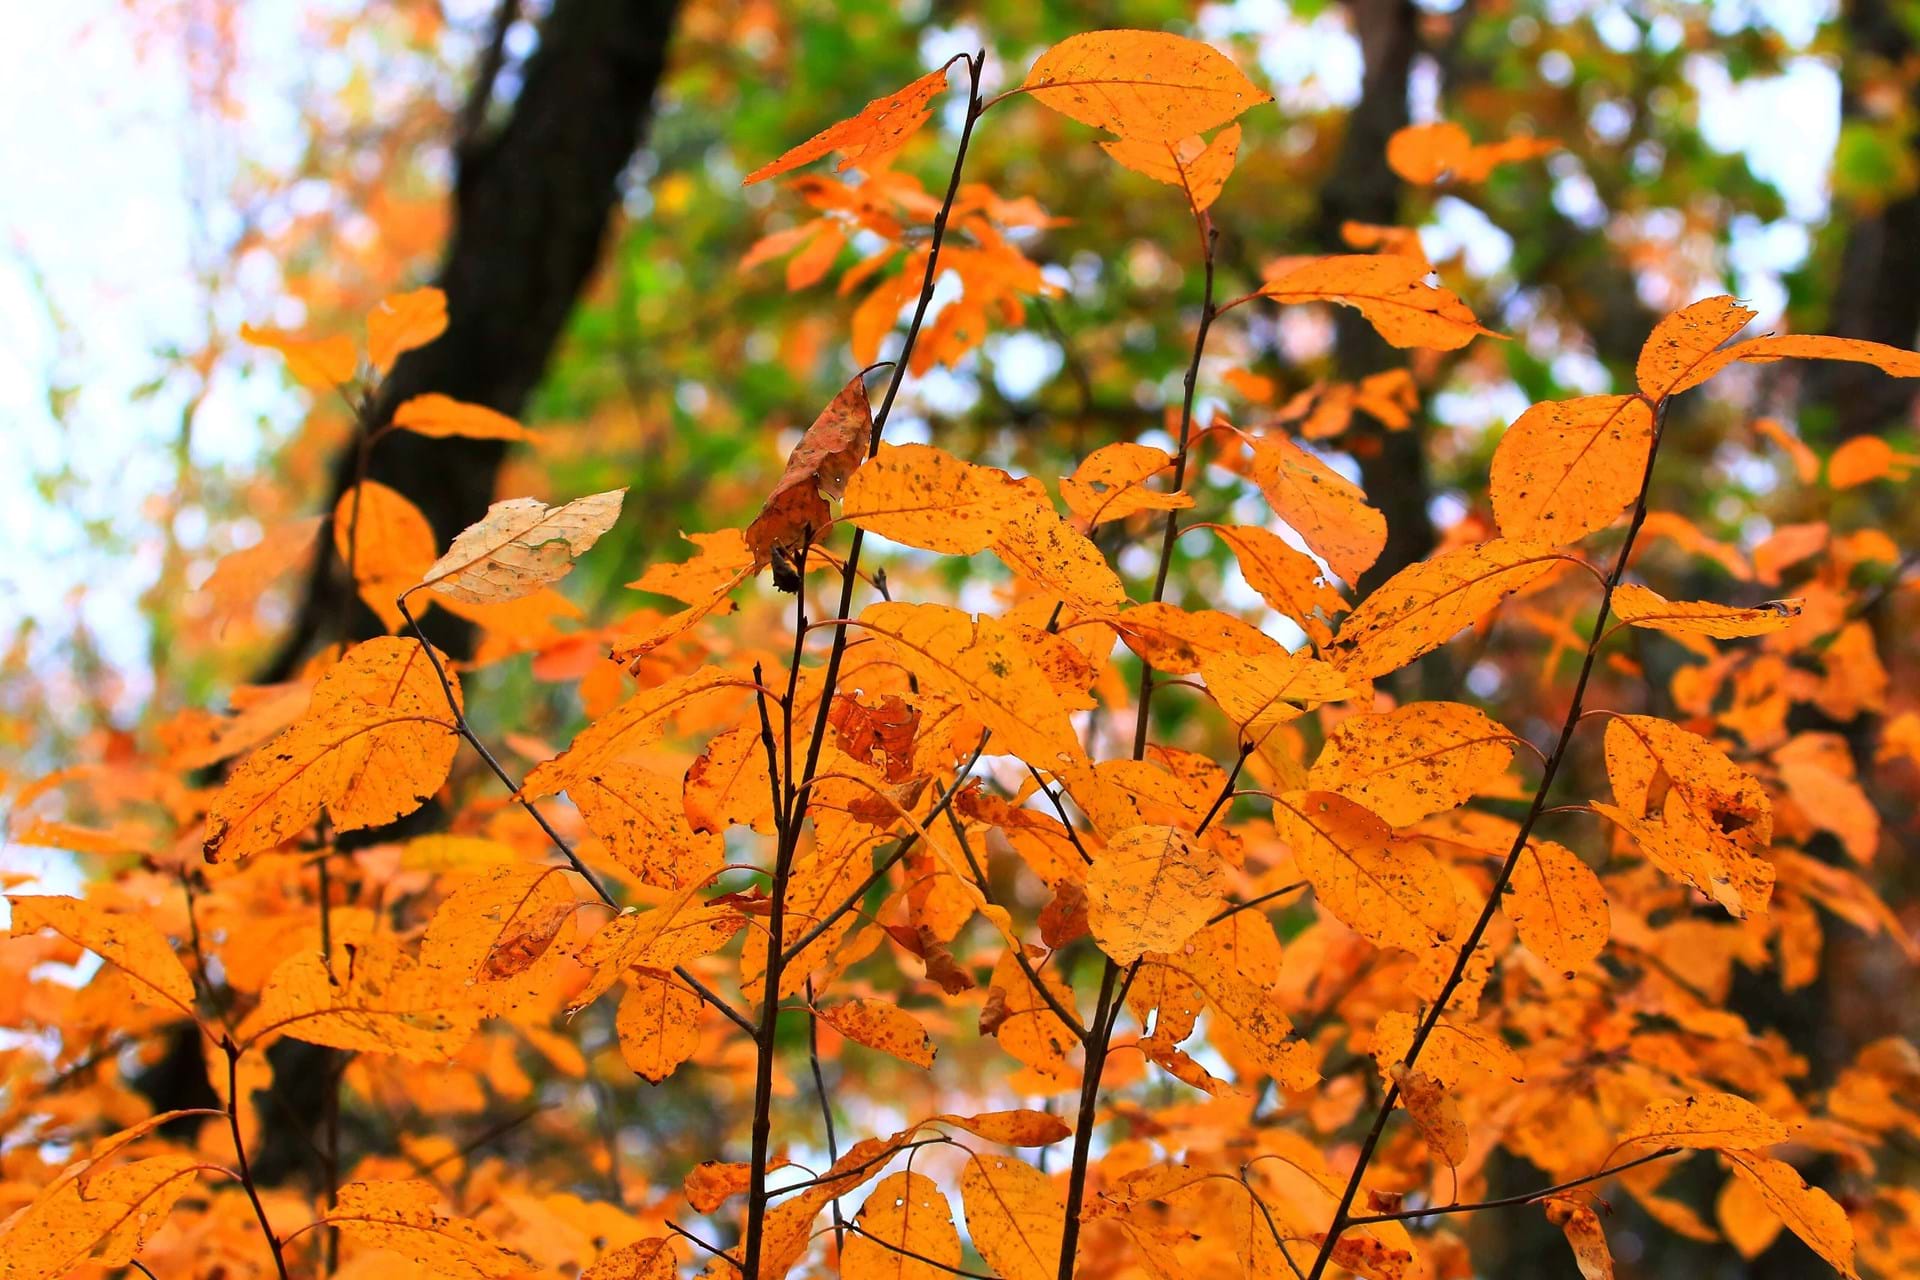 a close up image of bright orange leaves on branches